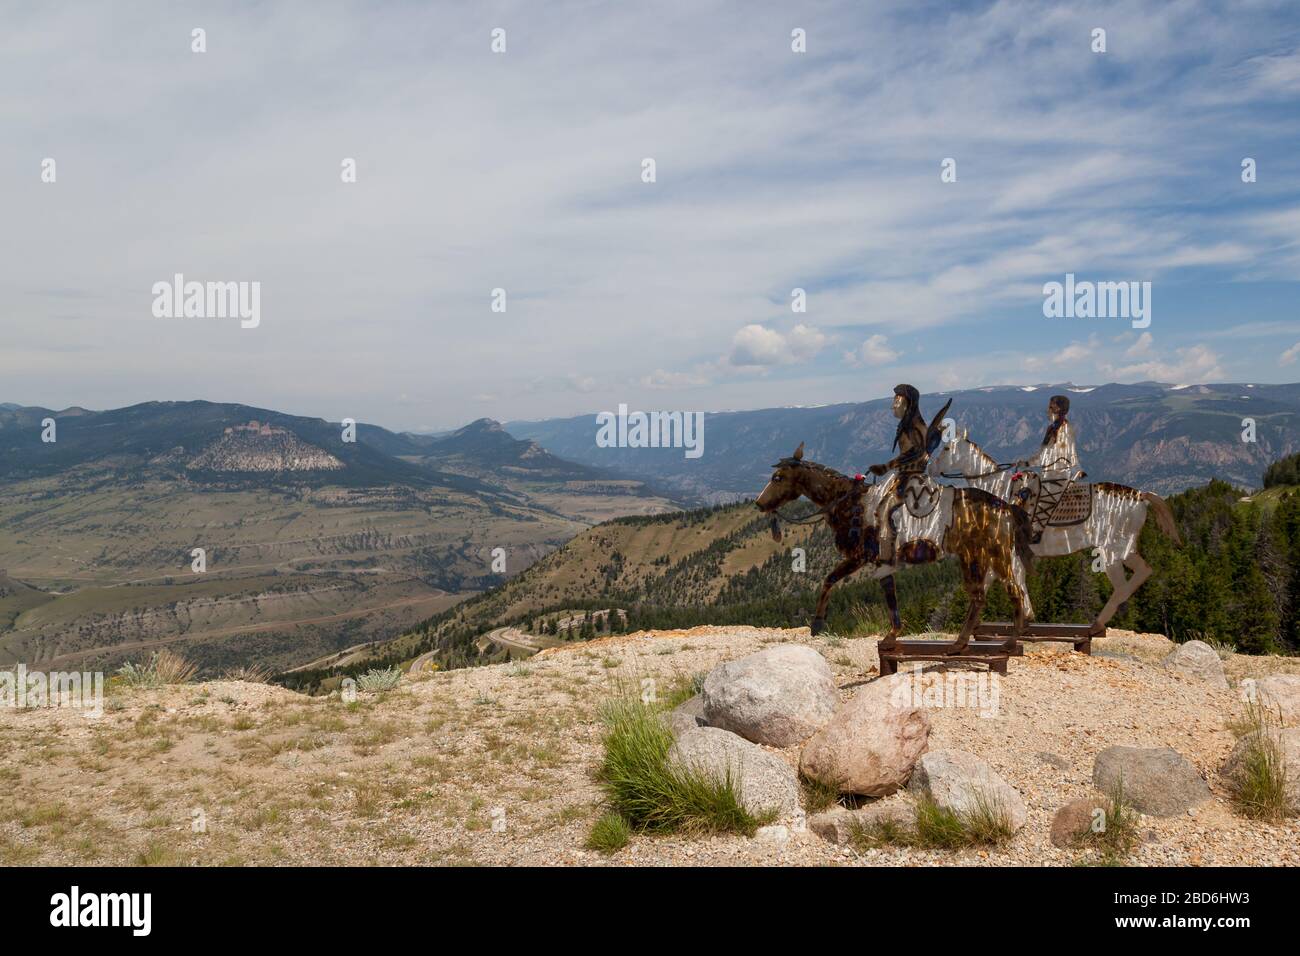 Dead Indian Pass, Wyoming / USA - July 14, 2014:  Metal cutout artwork of Nez Perce tribal members on horseback displayed at the summit of Dead Indian Stock Photo